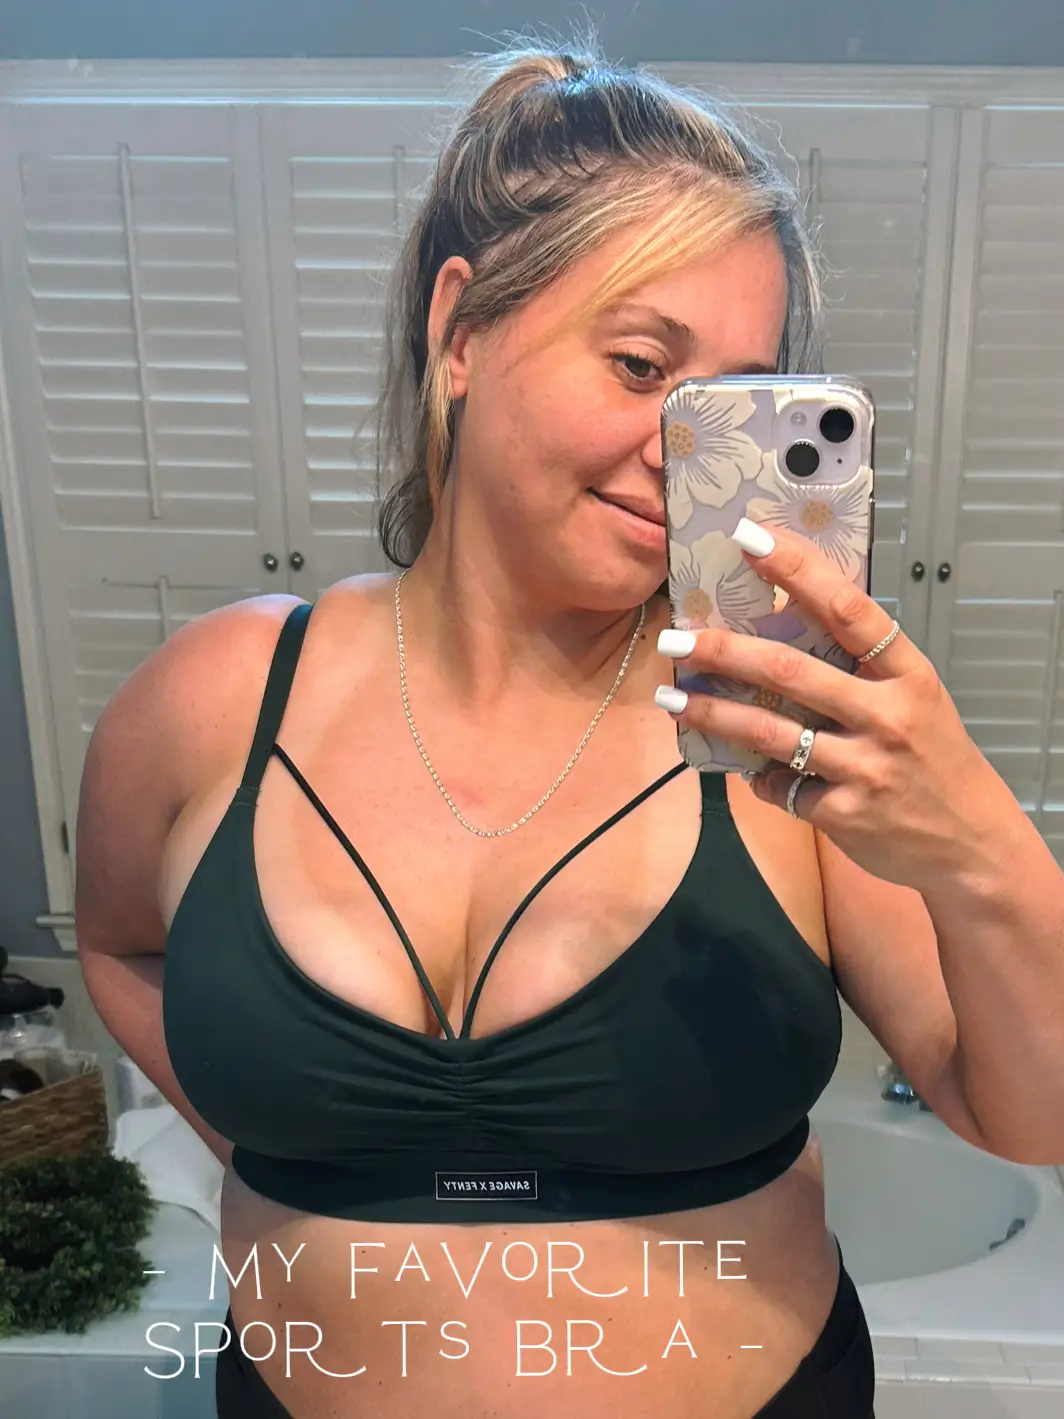 Such a cute freaking sports bra!!  Gallery posted by Jenn Mahoney